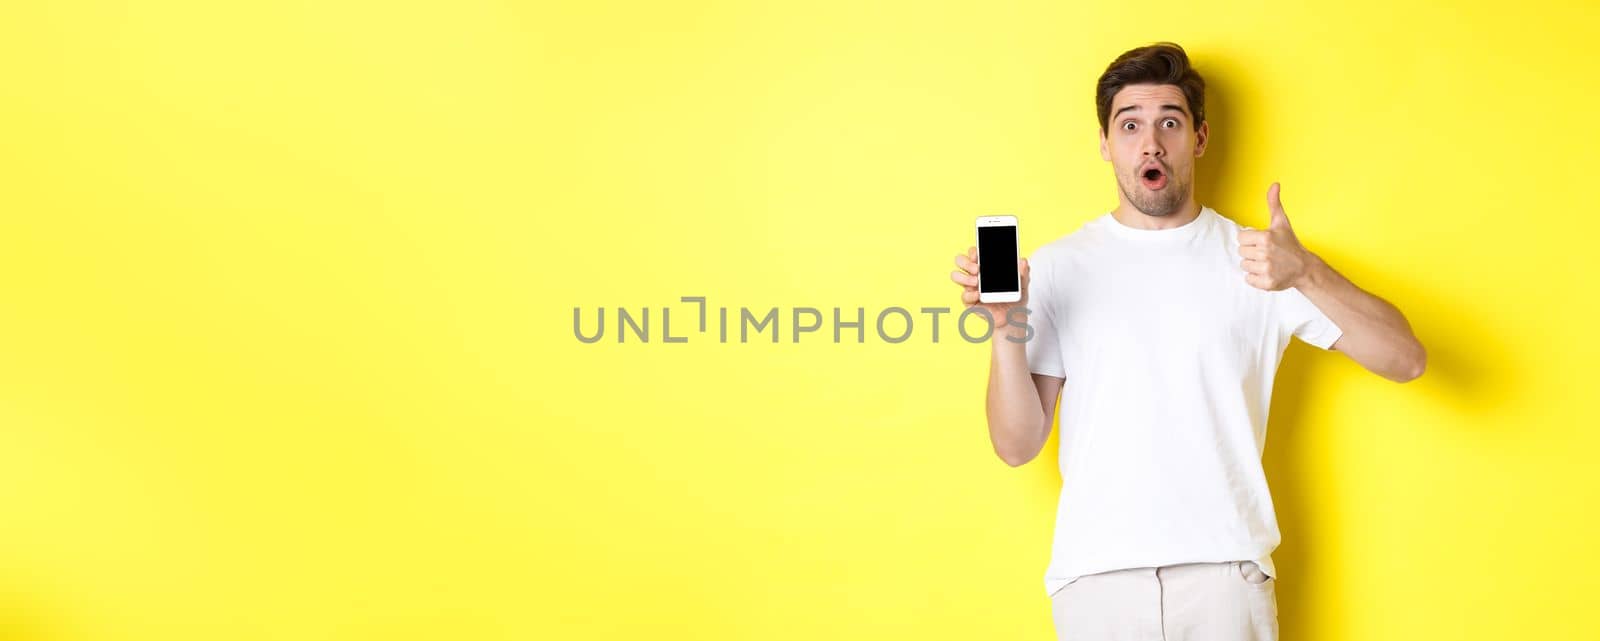 Impressed guy showing awesome smartphone app on screen and thumb-up, gasping amazed, standing against yellow background.